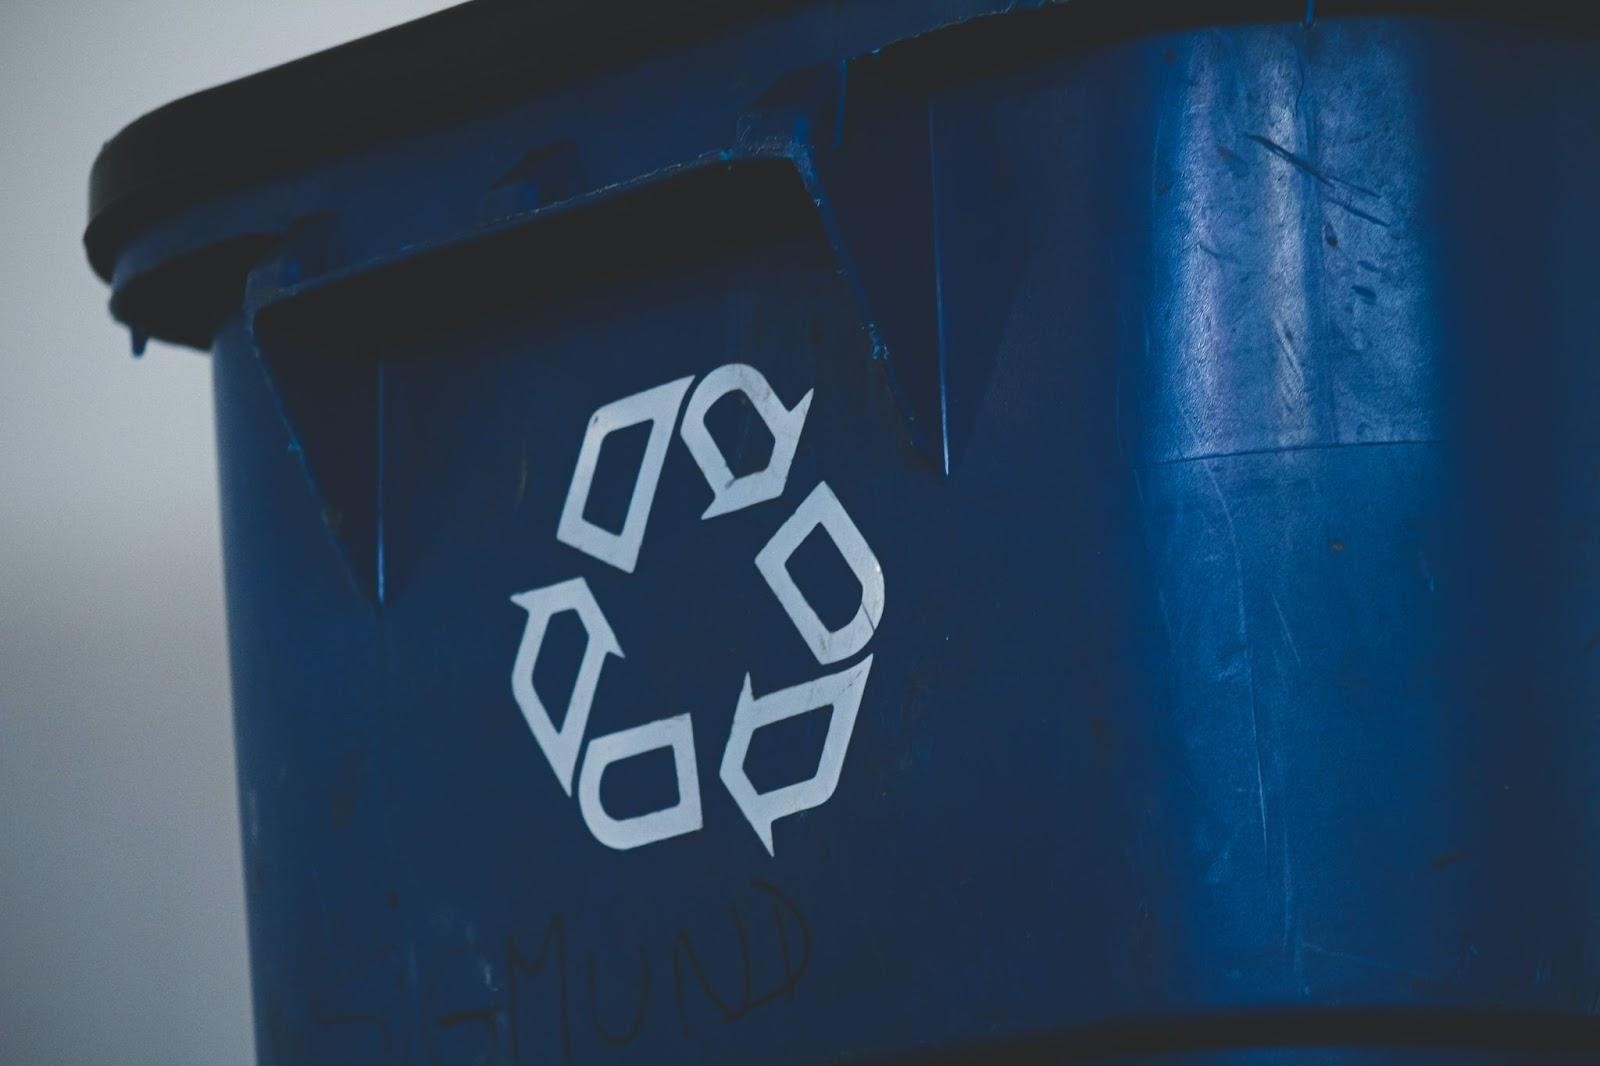 A waste bin that shows the universal recycling symbol or three chasing arrows also known as the Mobius loop